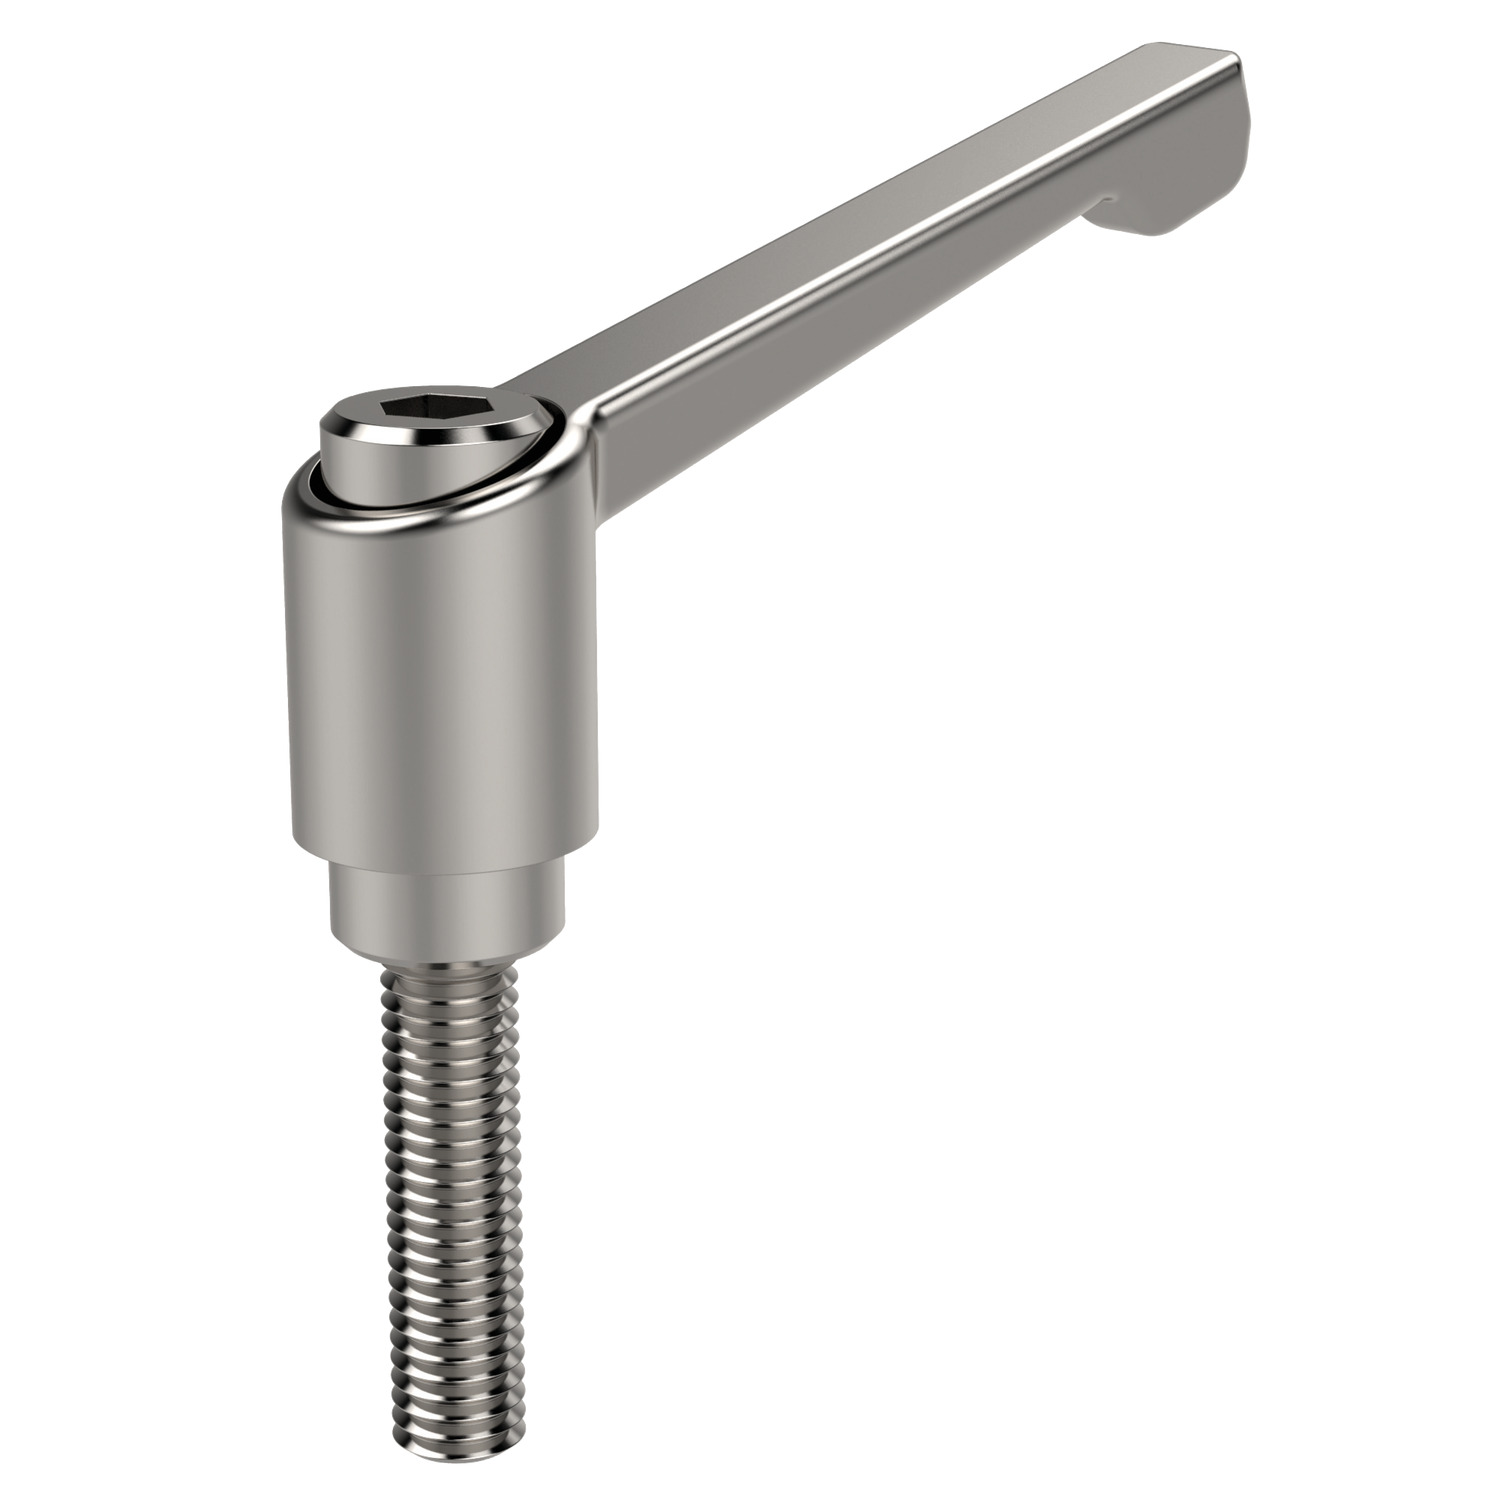 Product 74390, Adjustable Clamping Levers with grub screw - stainless / 